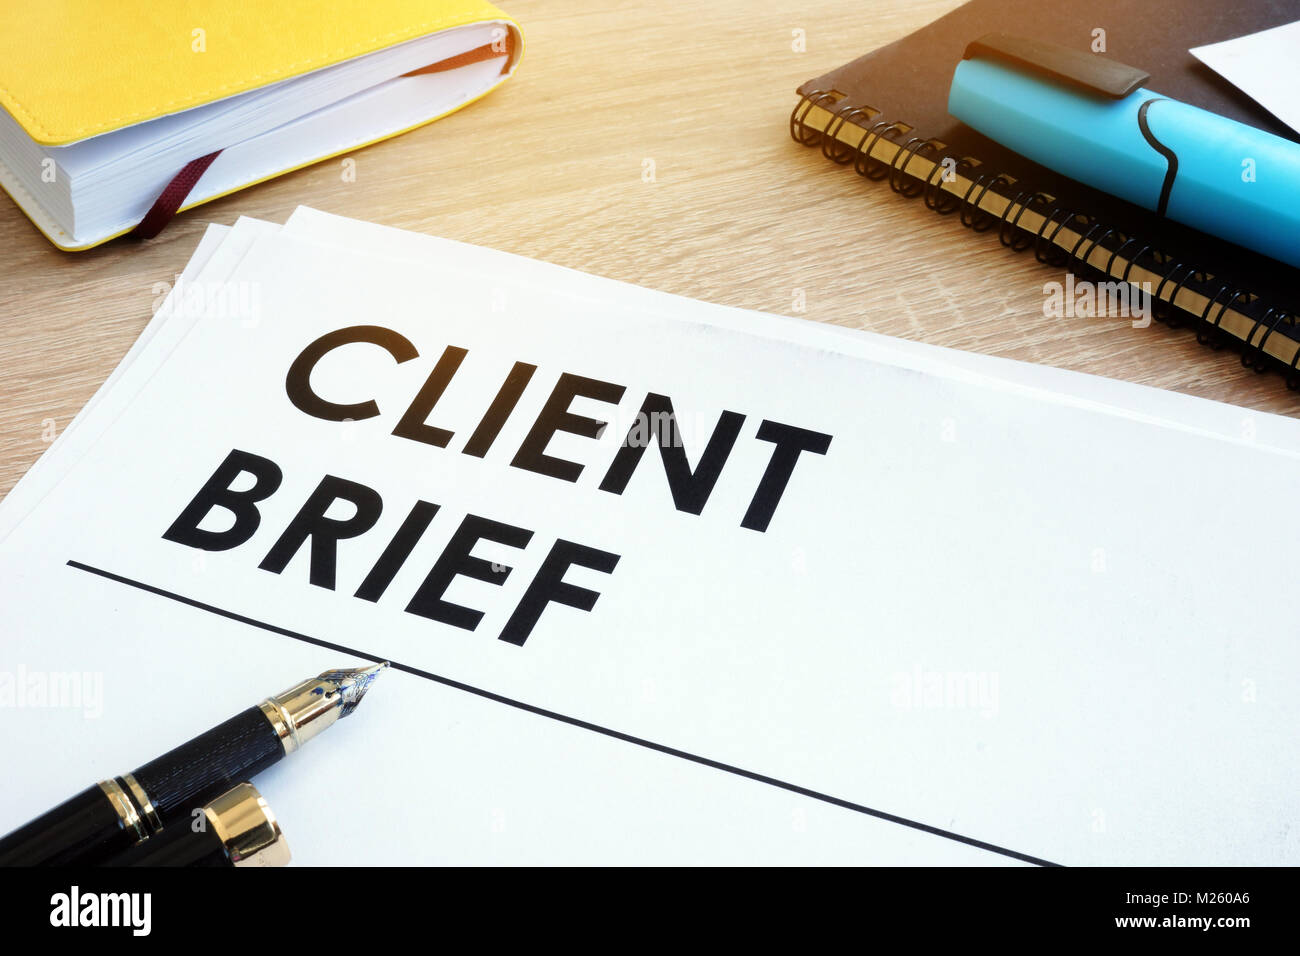 Client brief on a wooden desk with note. Stock Photo